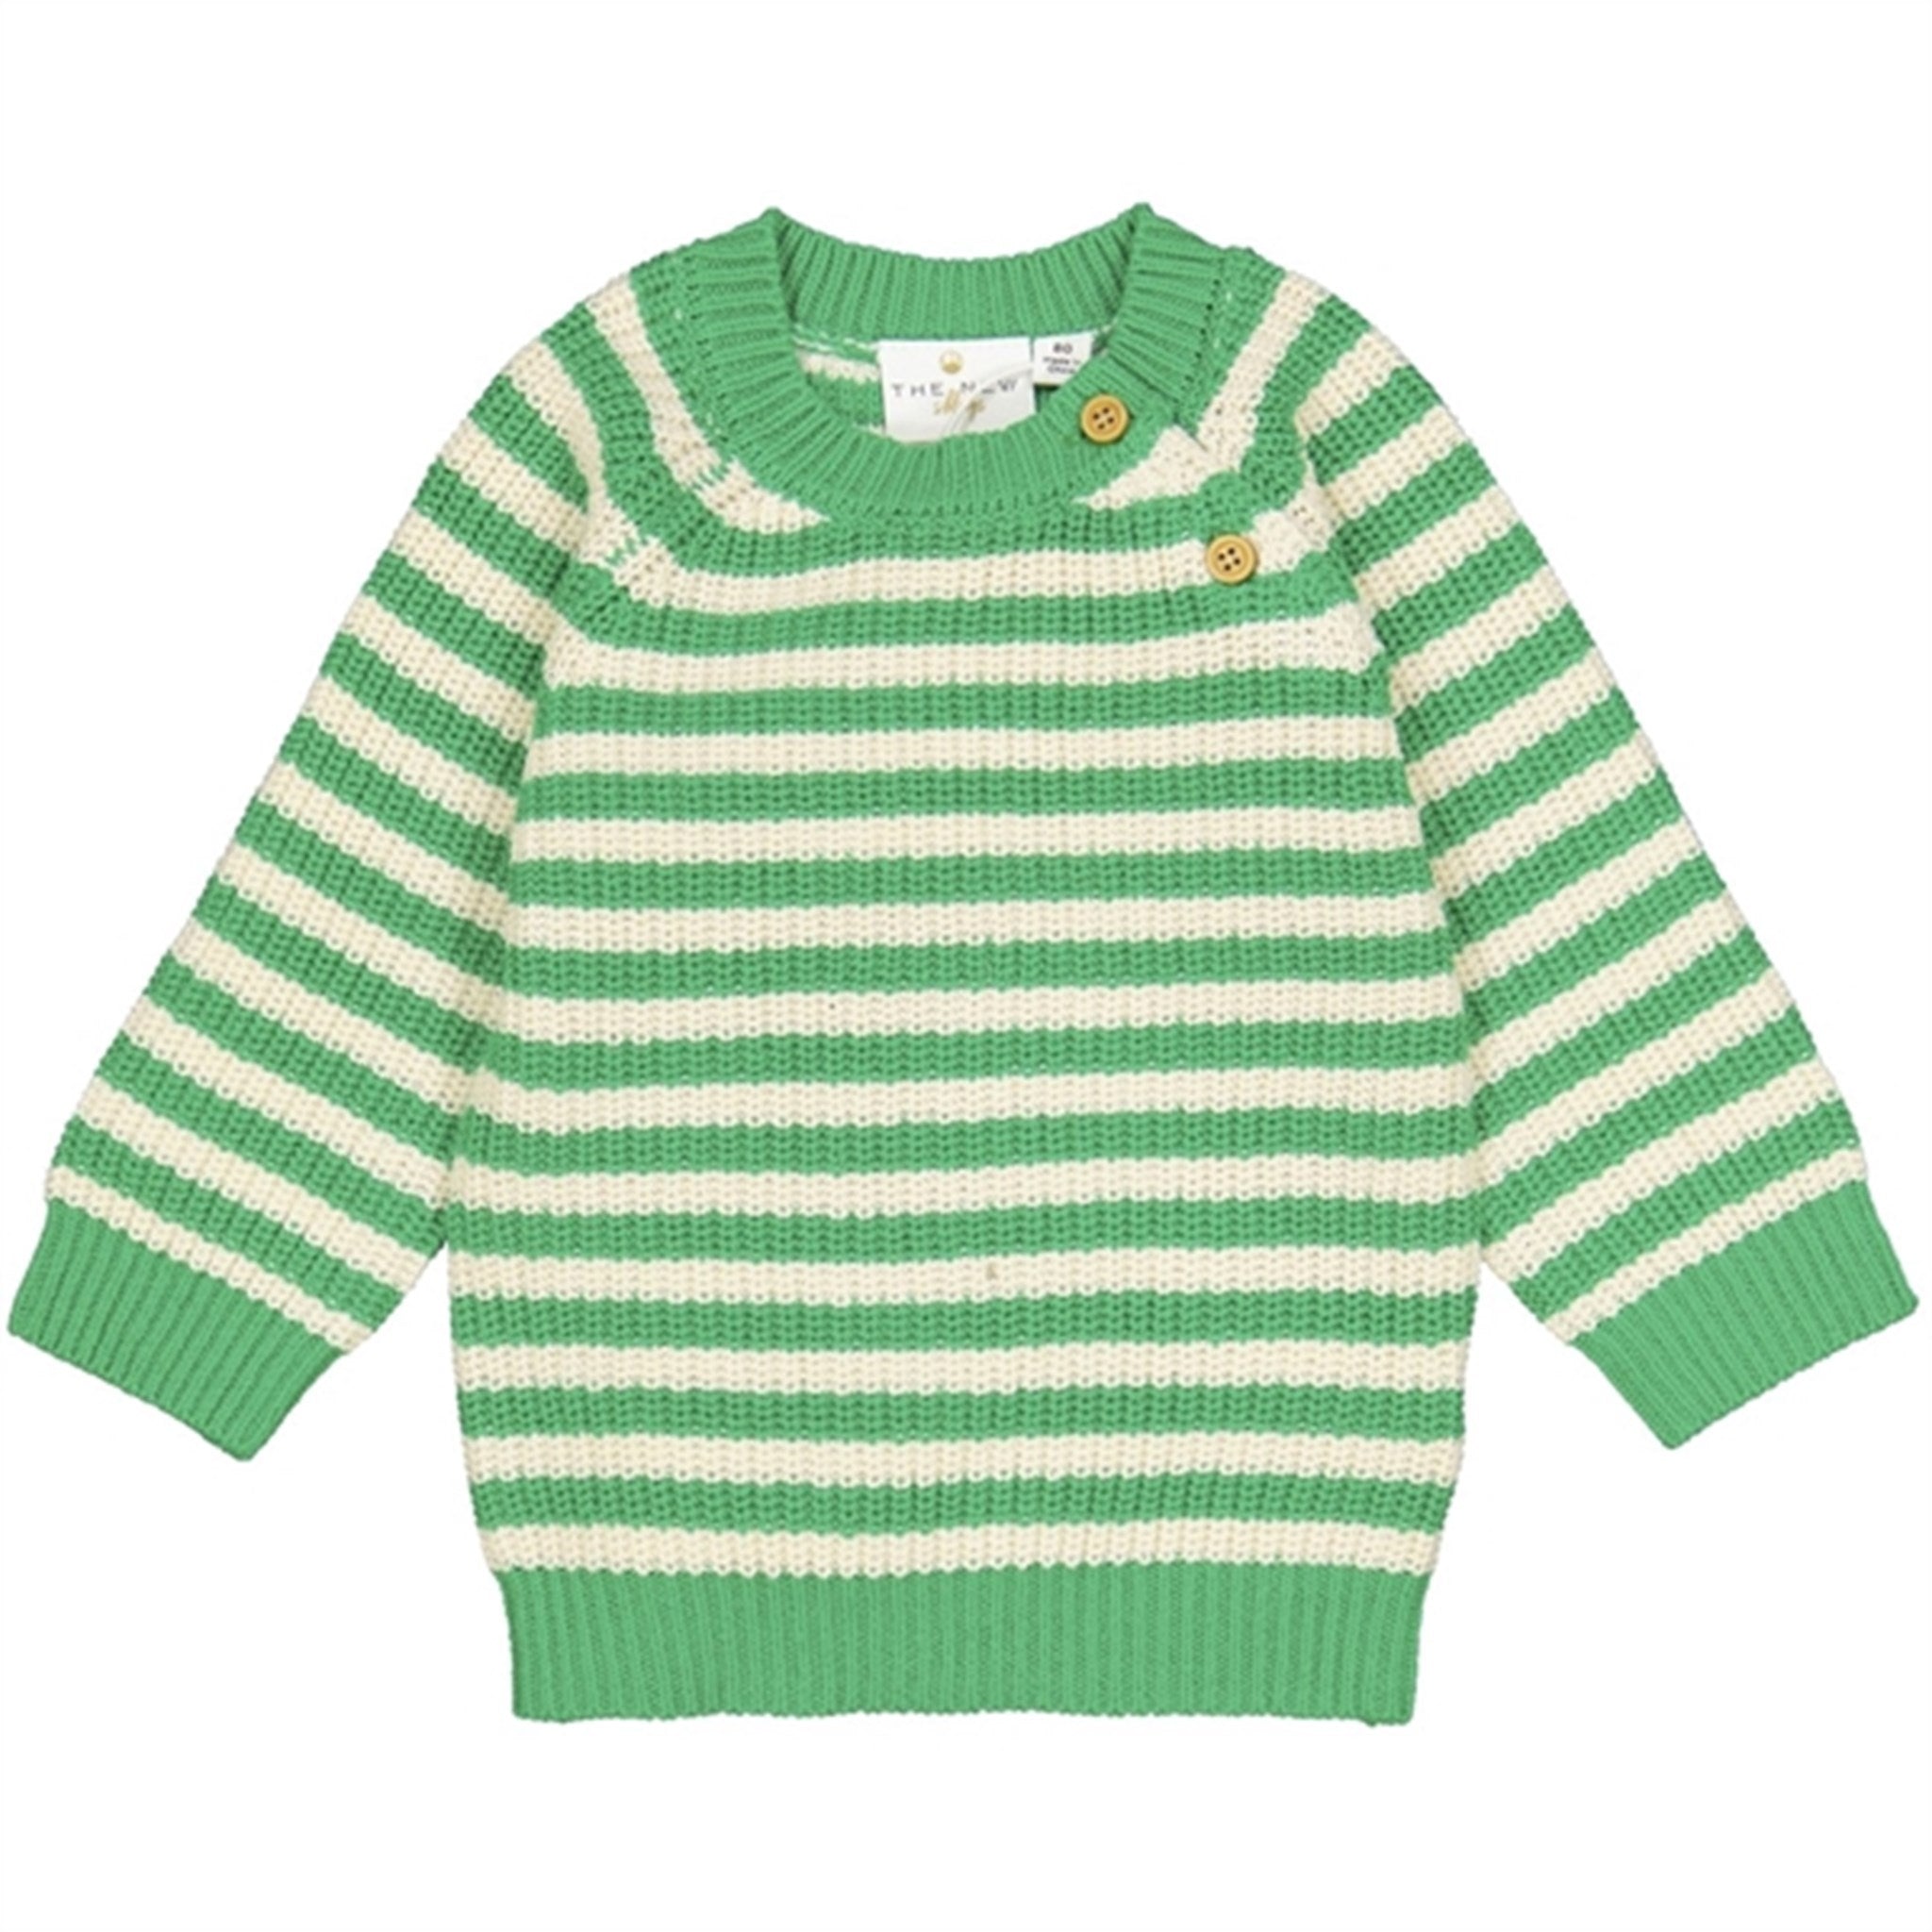 THE NEW Siblings Bright Green Ilfred Strikk Sweater